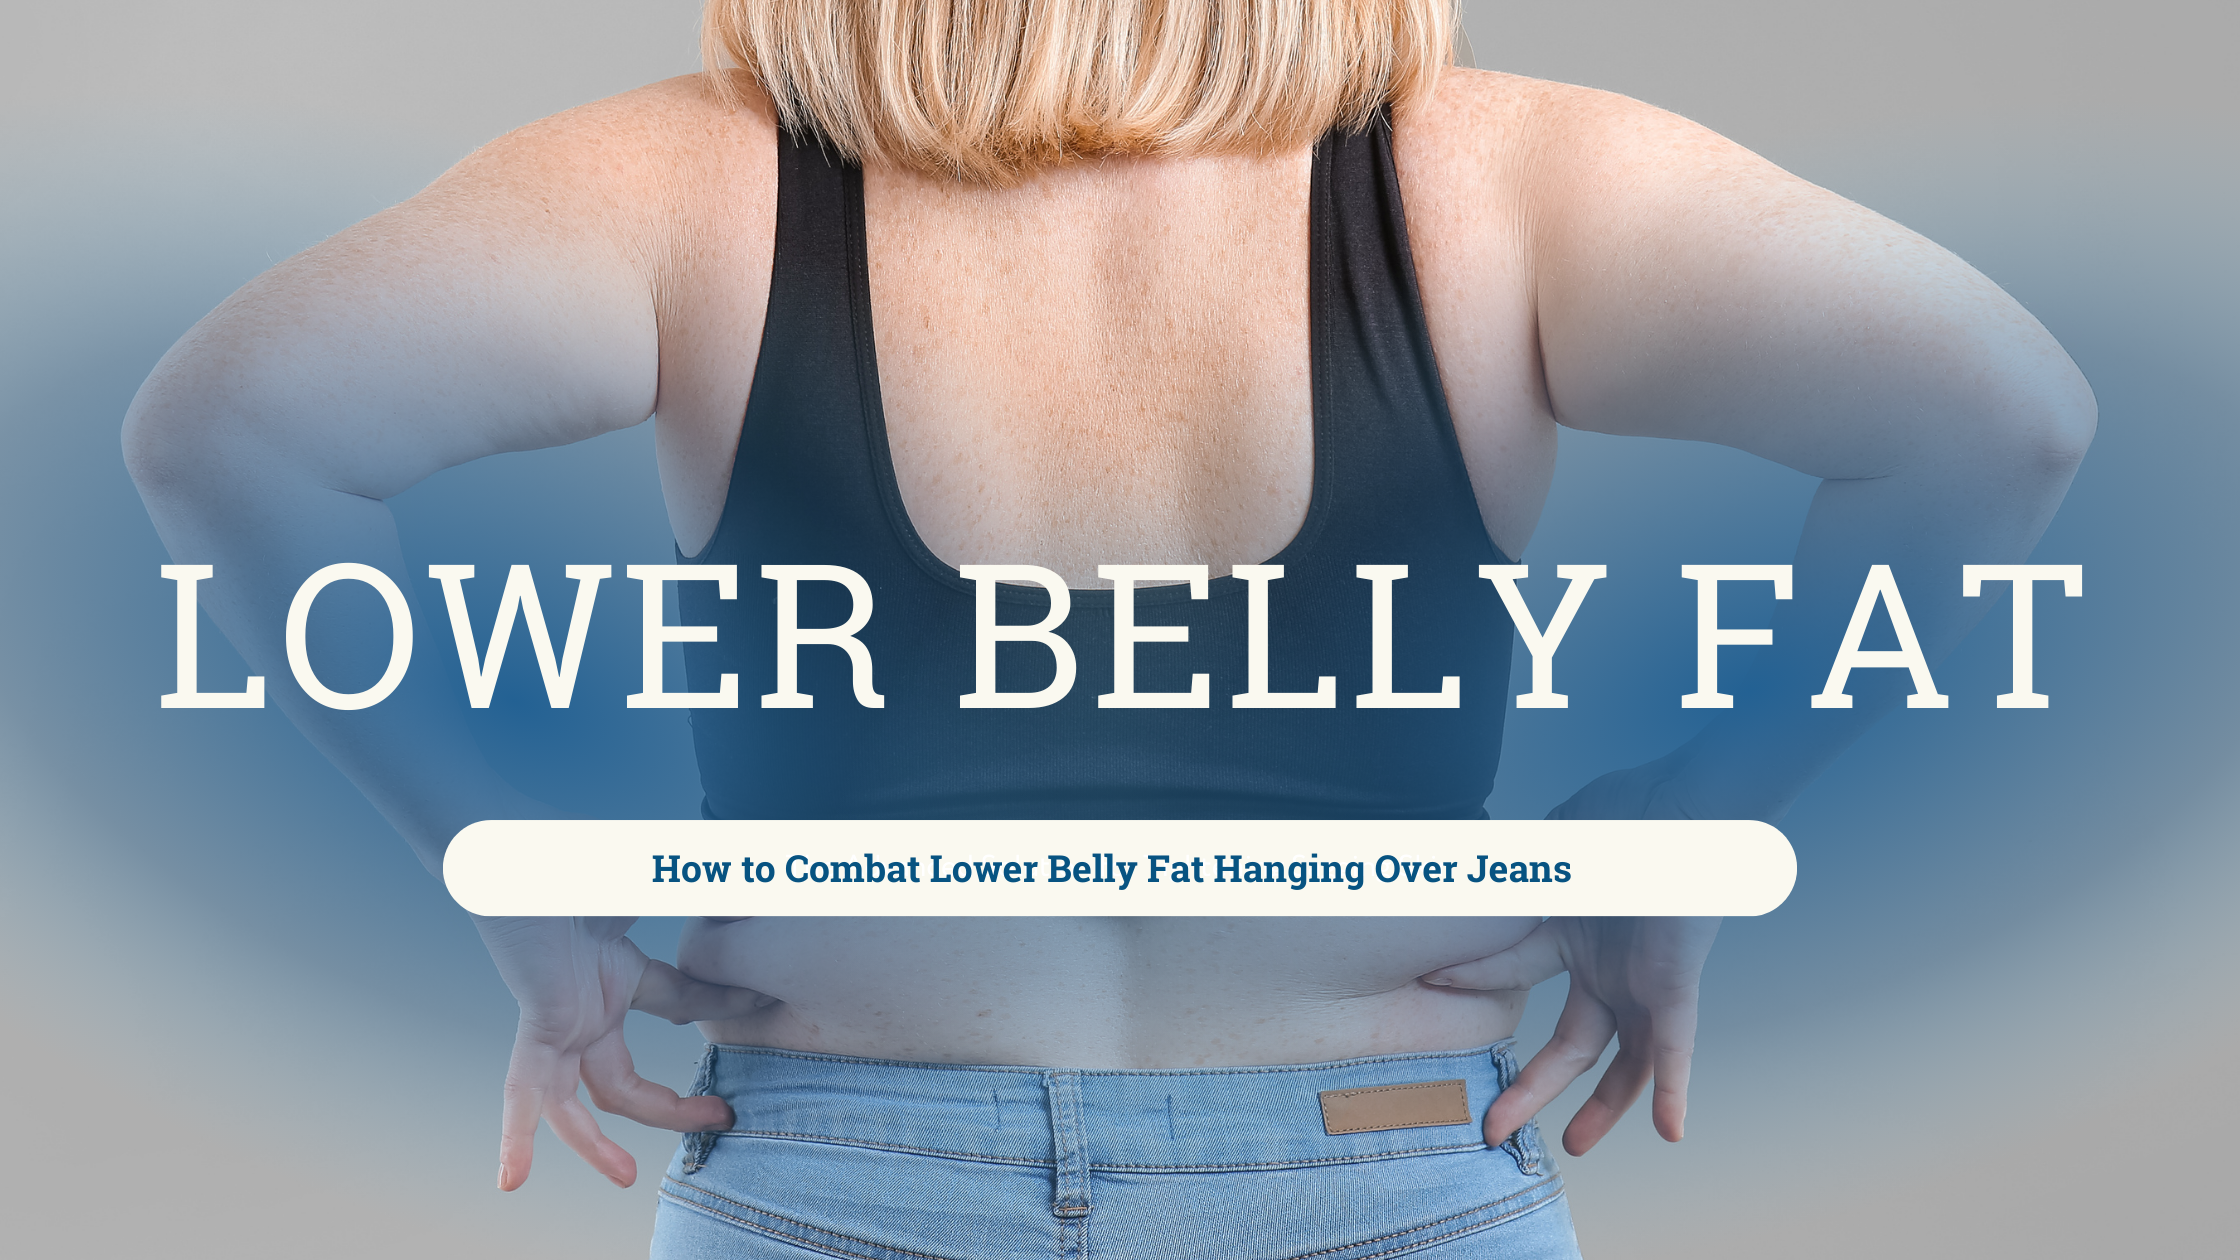 How to Combat Lower Belly Fat Hanging Over Jeans